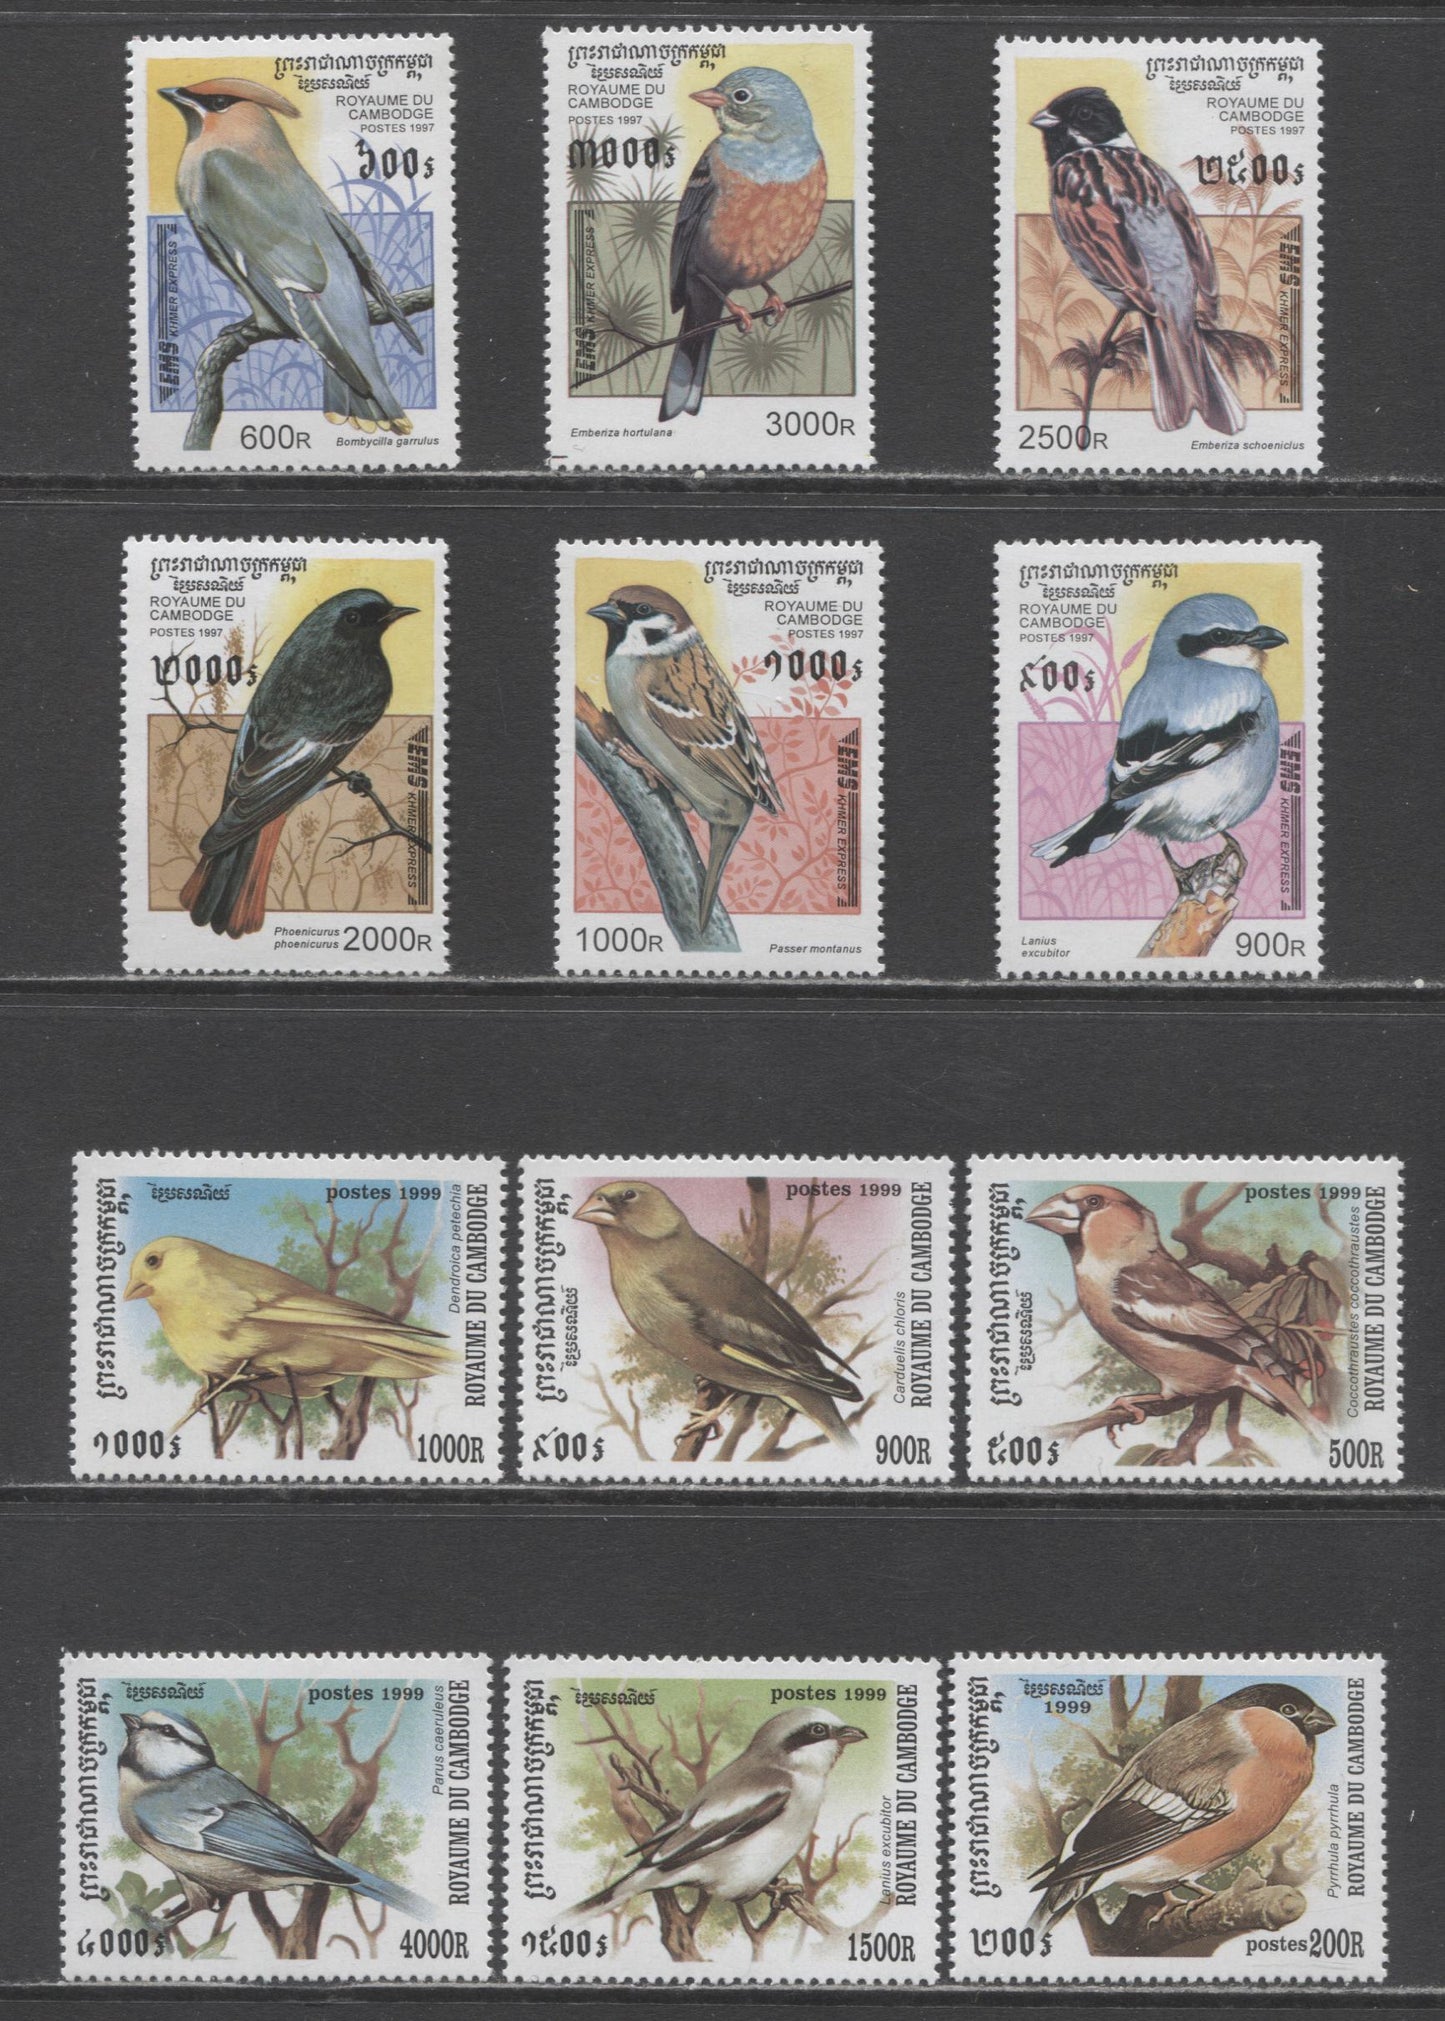 Lot 99A Cambodia SC#1598/1901 1997-1999 Express Mail Service - Birds Issues, 12 VFNH Singles, Click on Listing to See ALL Pictures, 2017 Scott Cat. $15